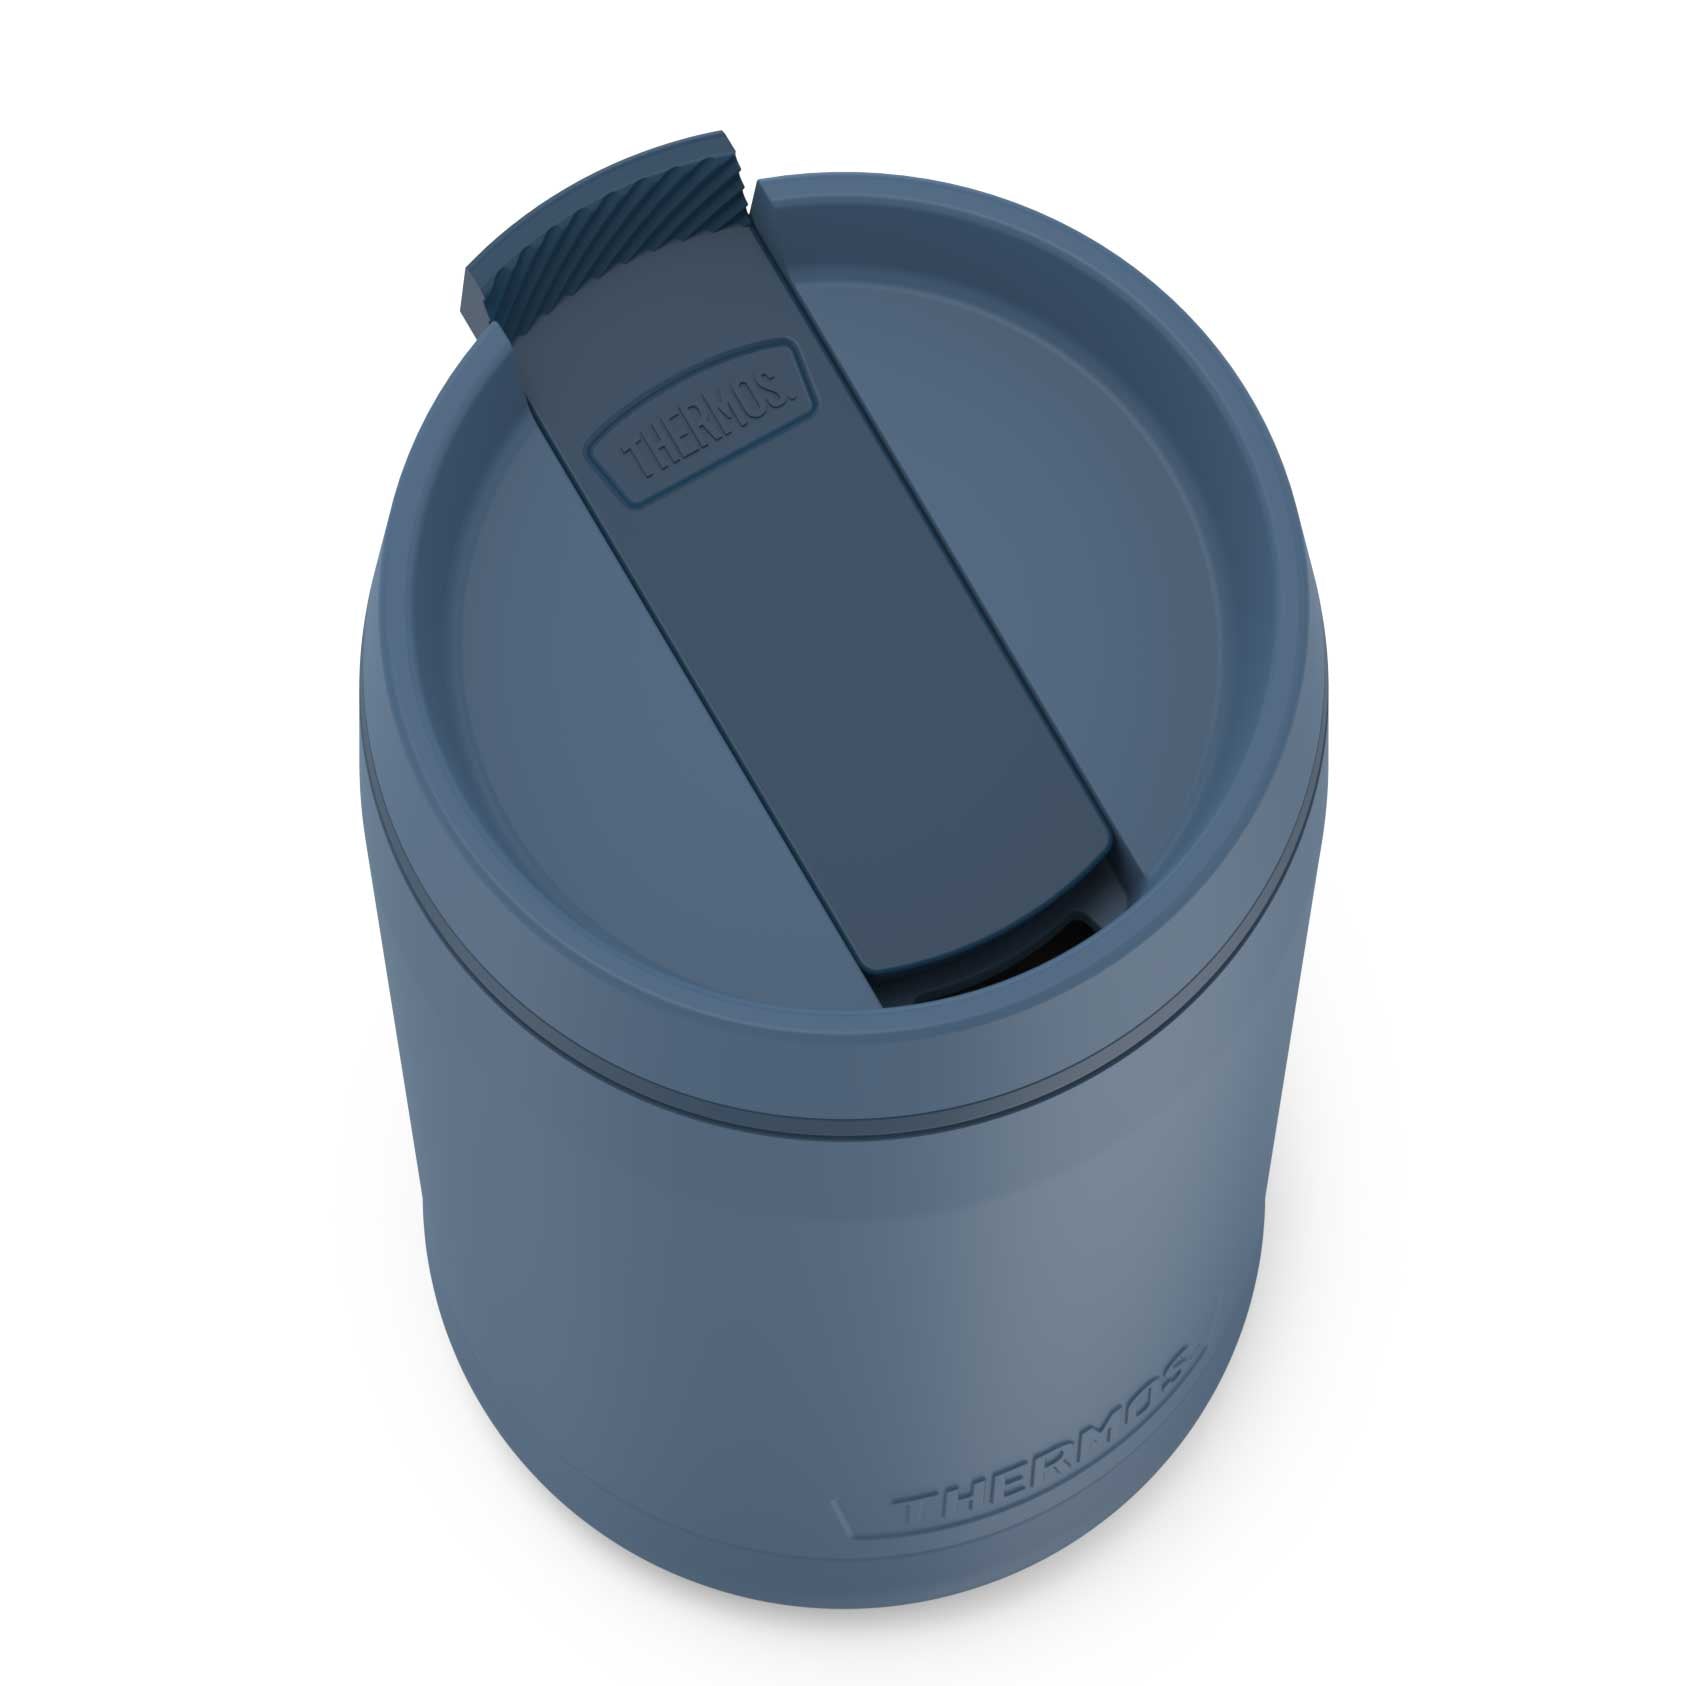 Thermos GUARDIAN Food Container - Piccantino Online Shop International